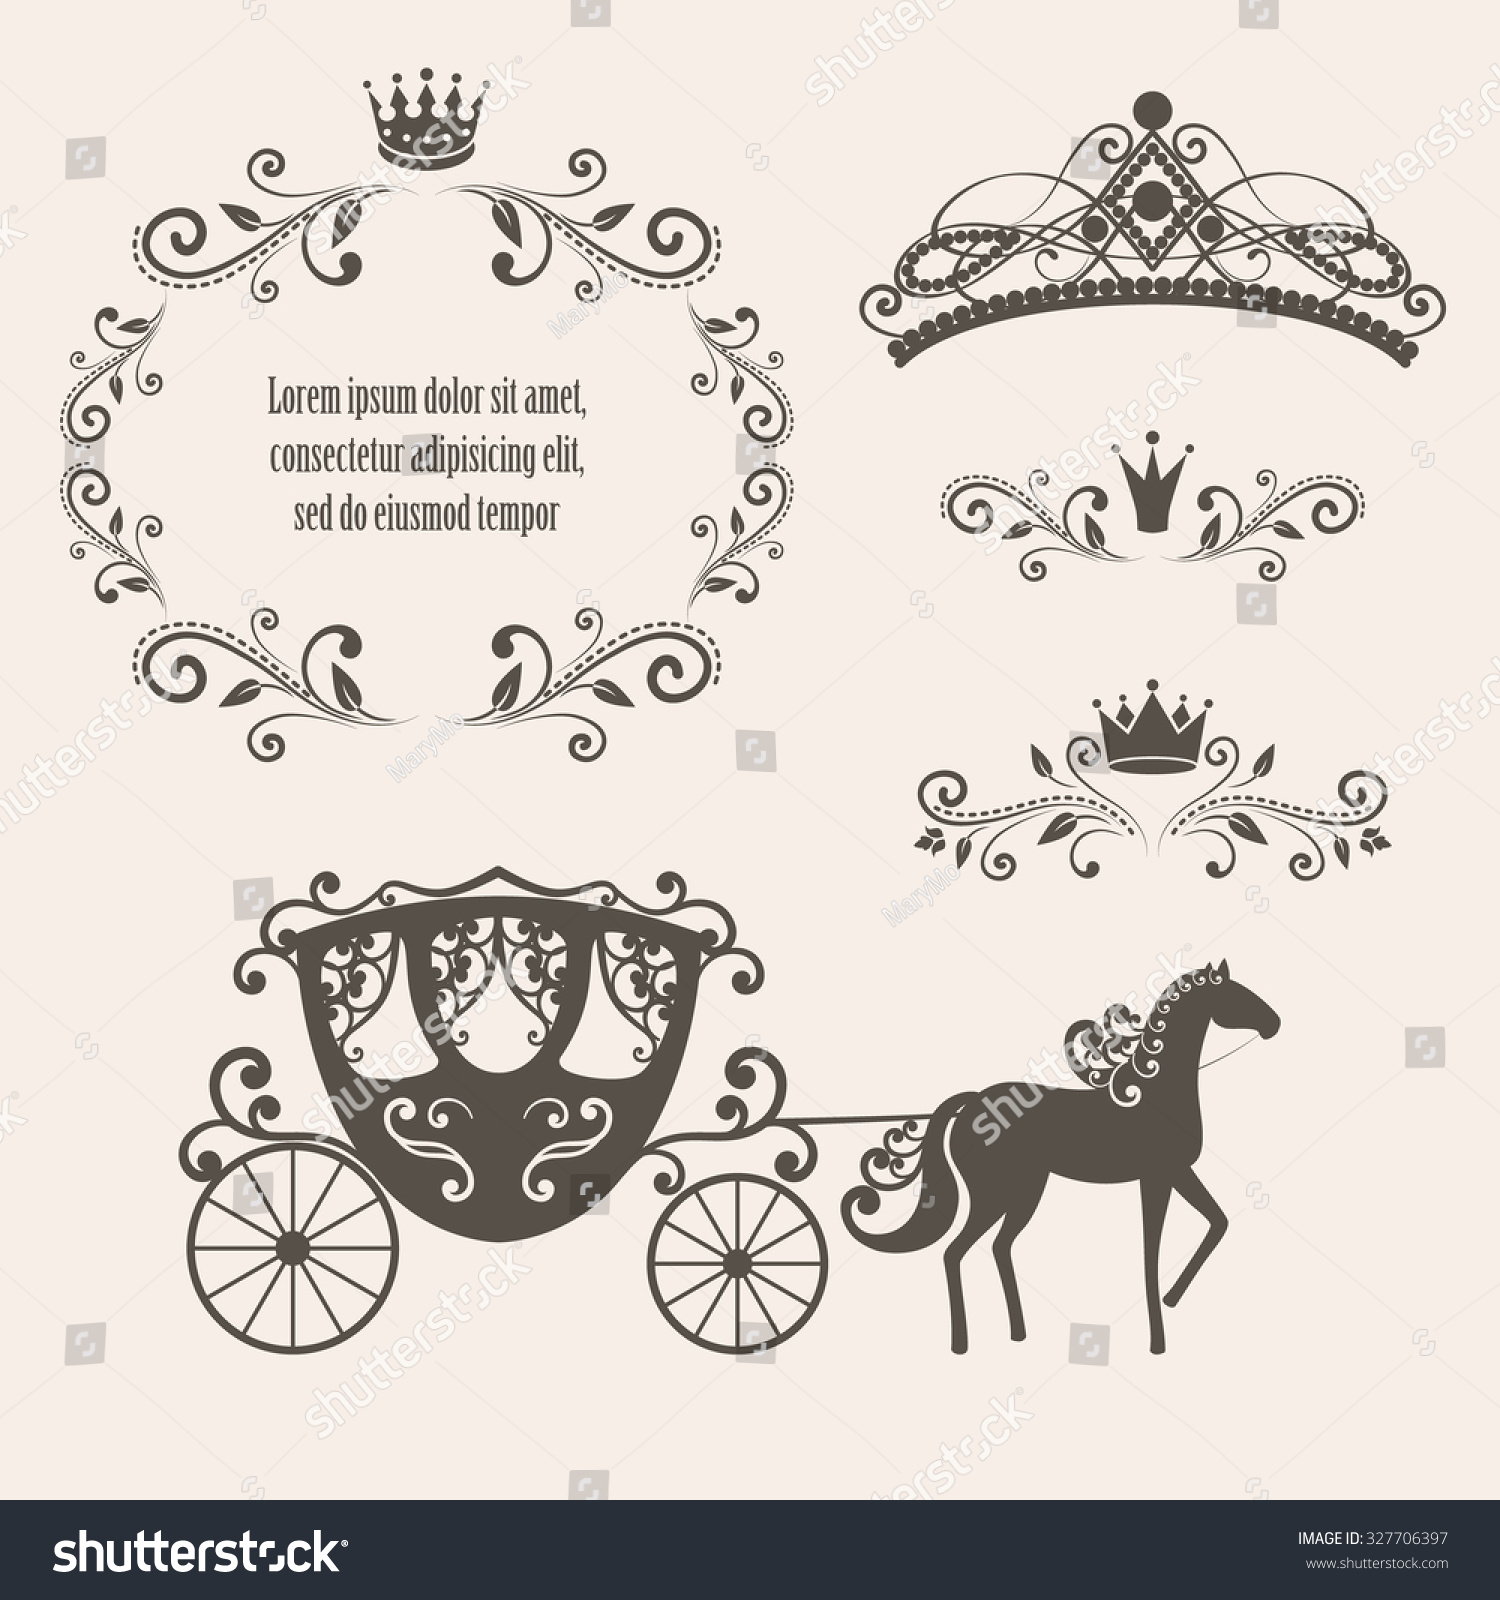 SVG of Design elements, vintage royalty frame with crown, ornamental style diadem, carriage in brown color. Vector illustration. Isolated on beige background. Can use for birthday card, wedding invitations. svg